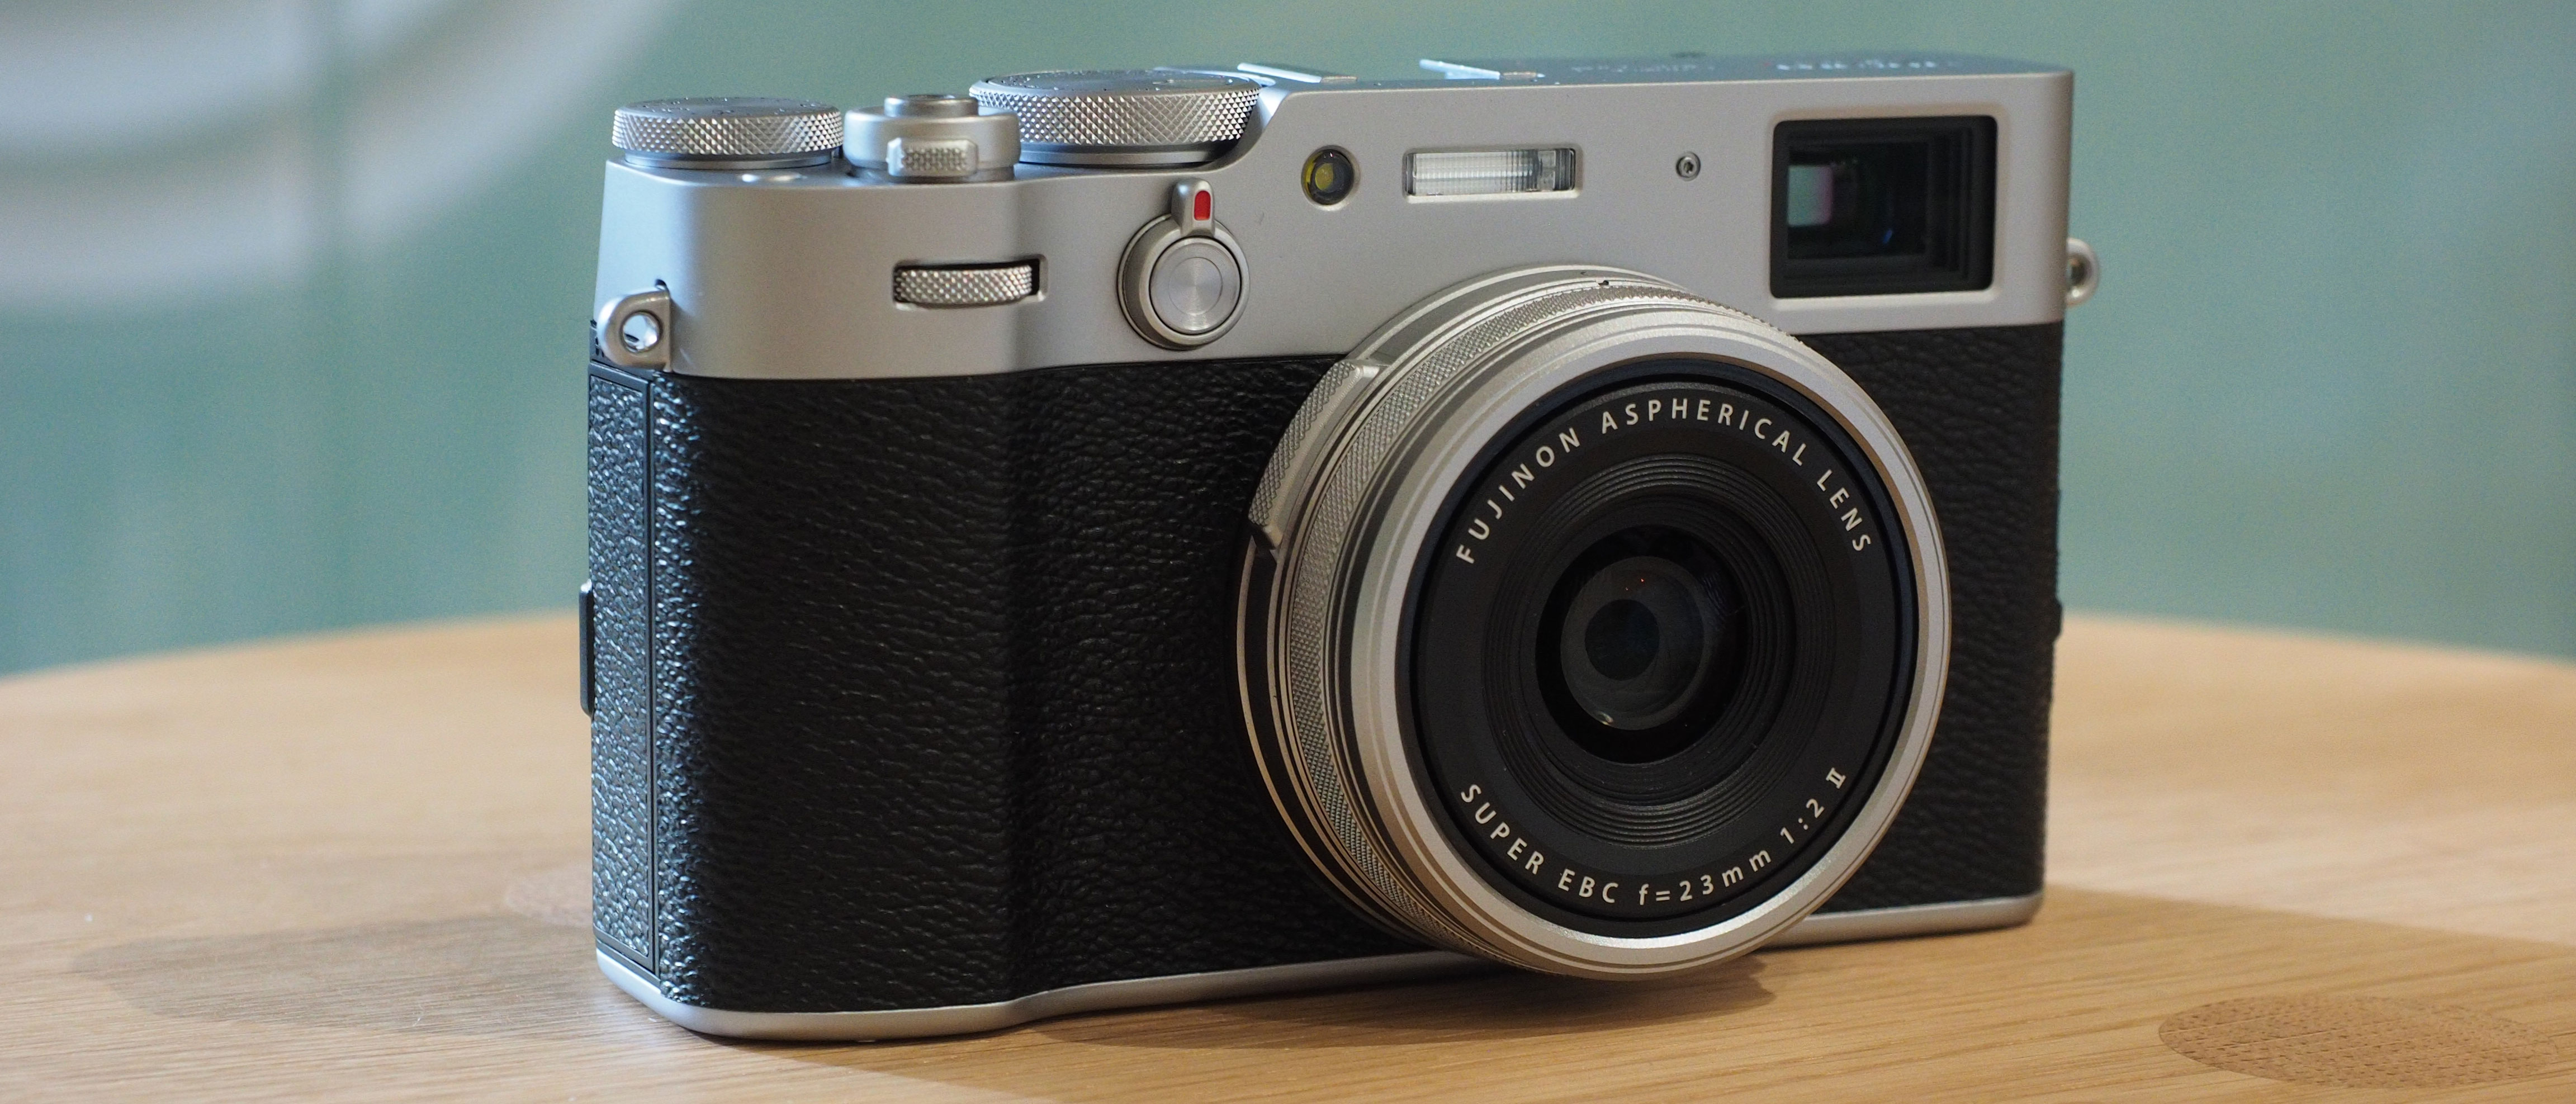 Fujifilm X100V review: The most capable prime-lens compact camera